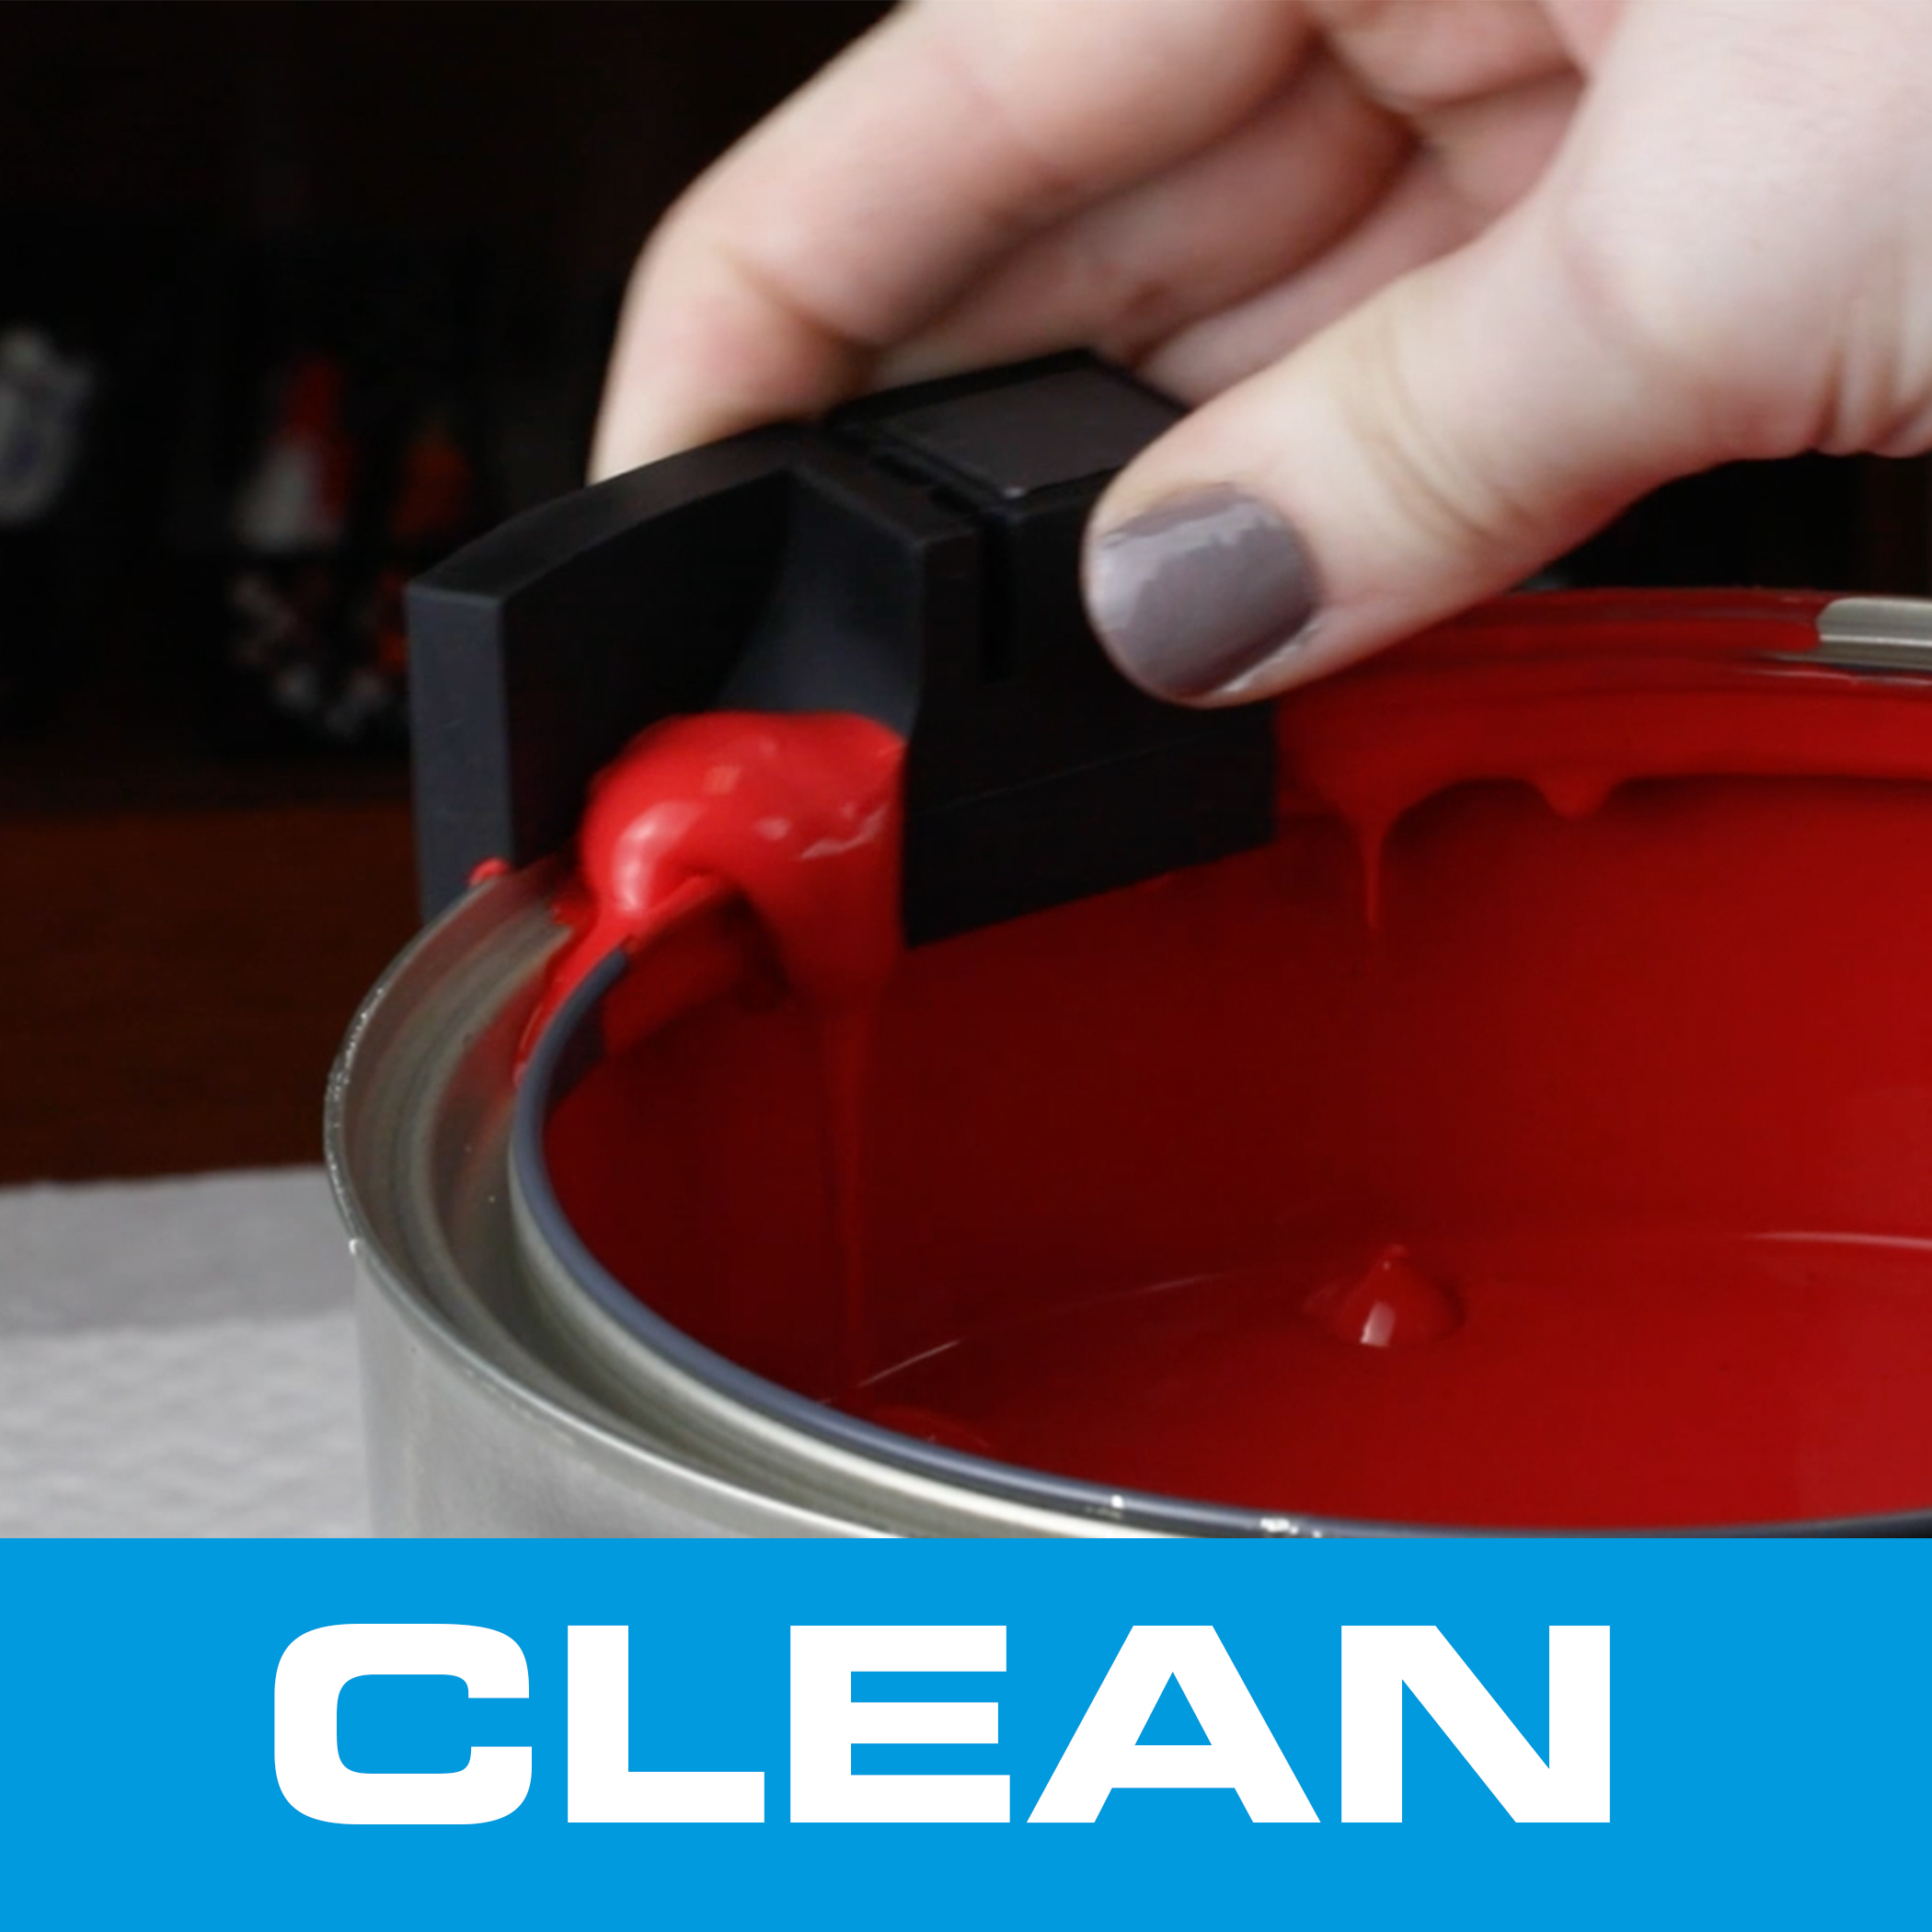 How to Easily Clean the Rim of a Paint Can – Spatty®